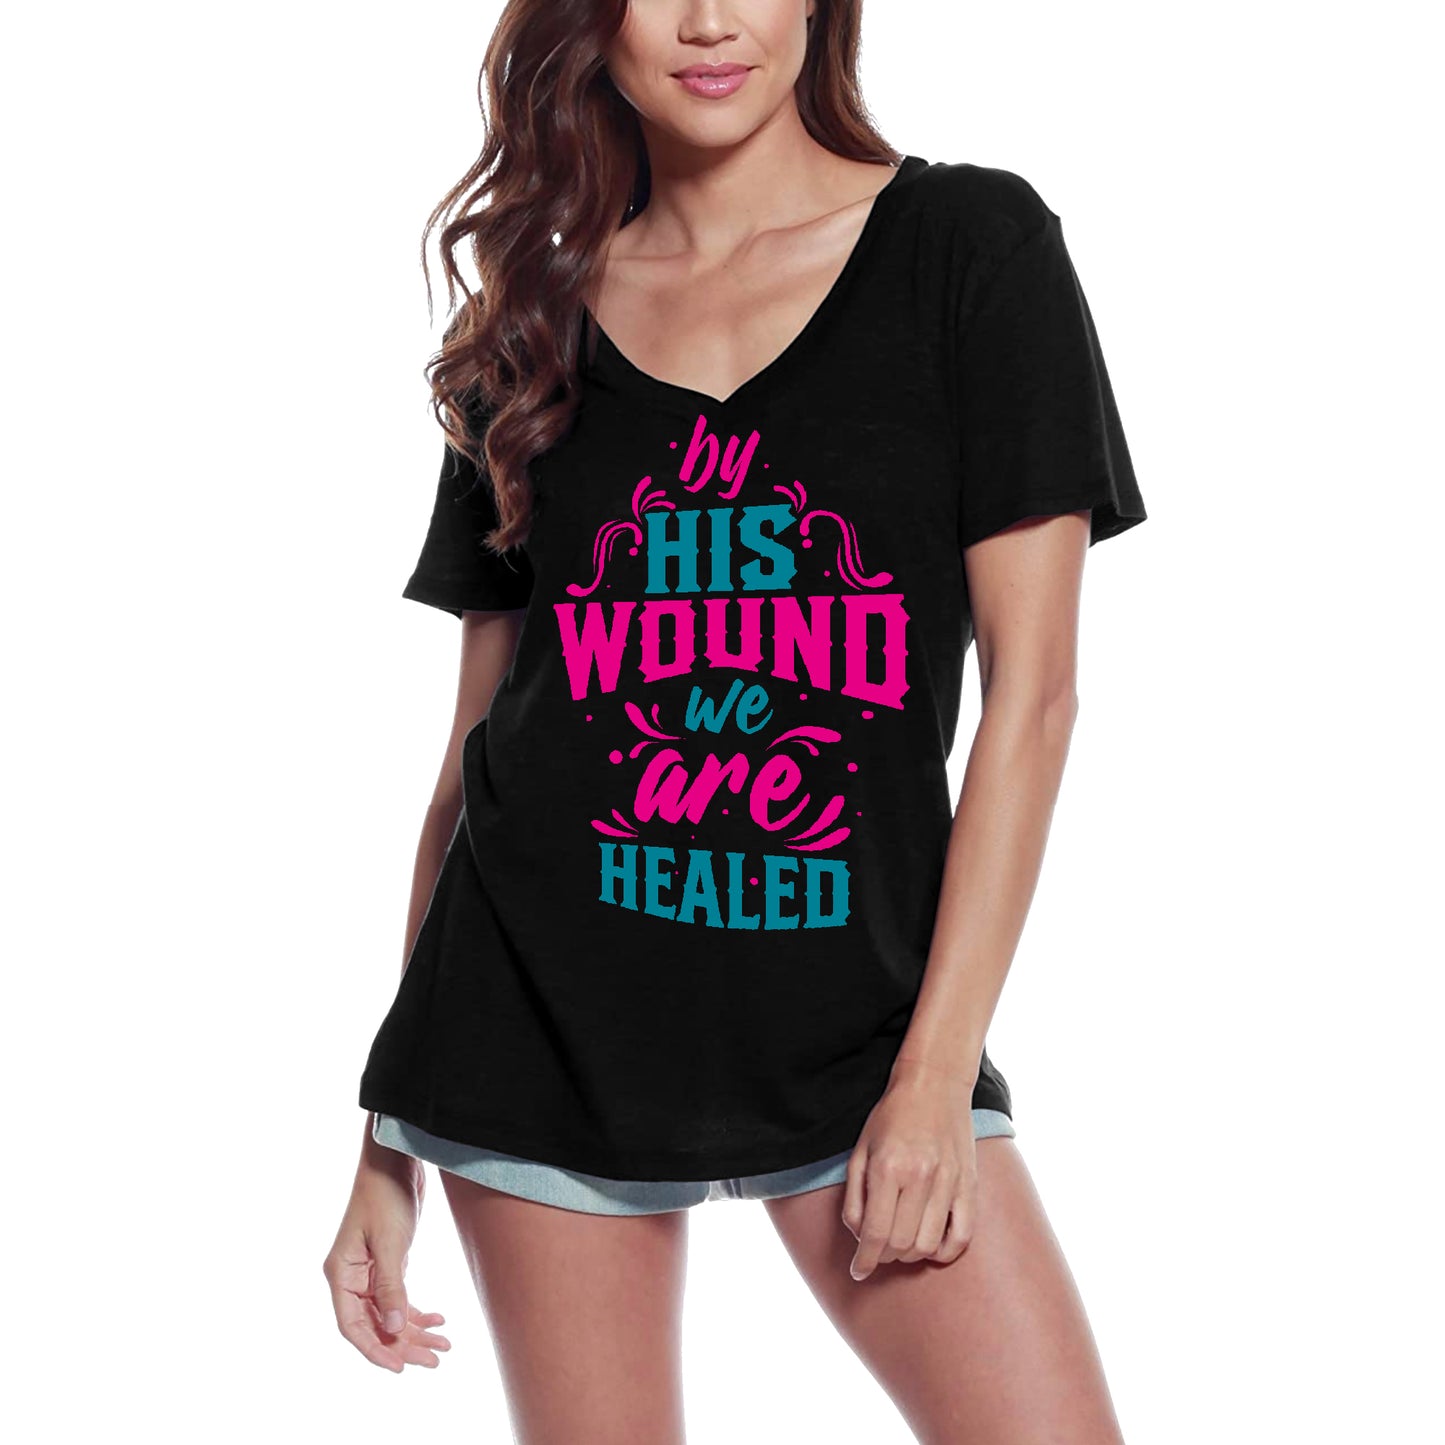 ULTRABASIC Women's T-Shirt By His Wound We are Healed - Christ Religious Shirt